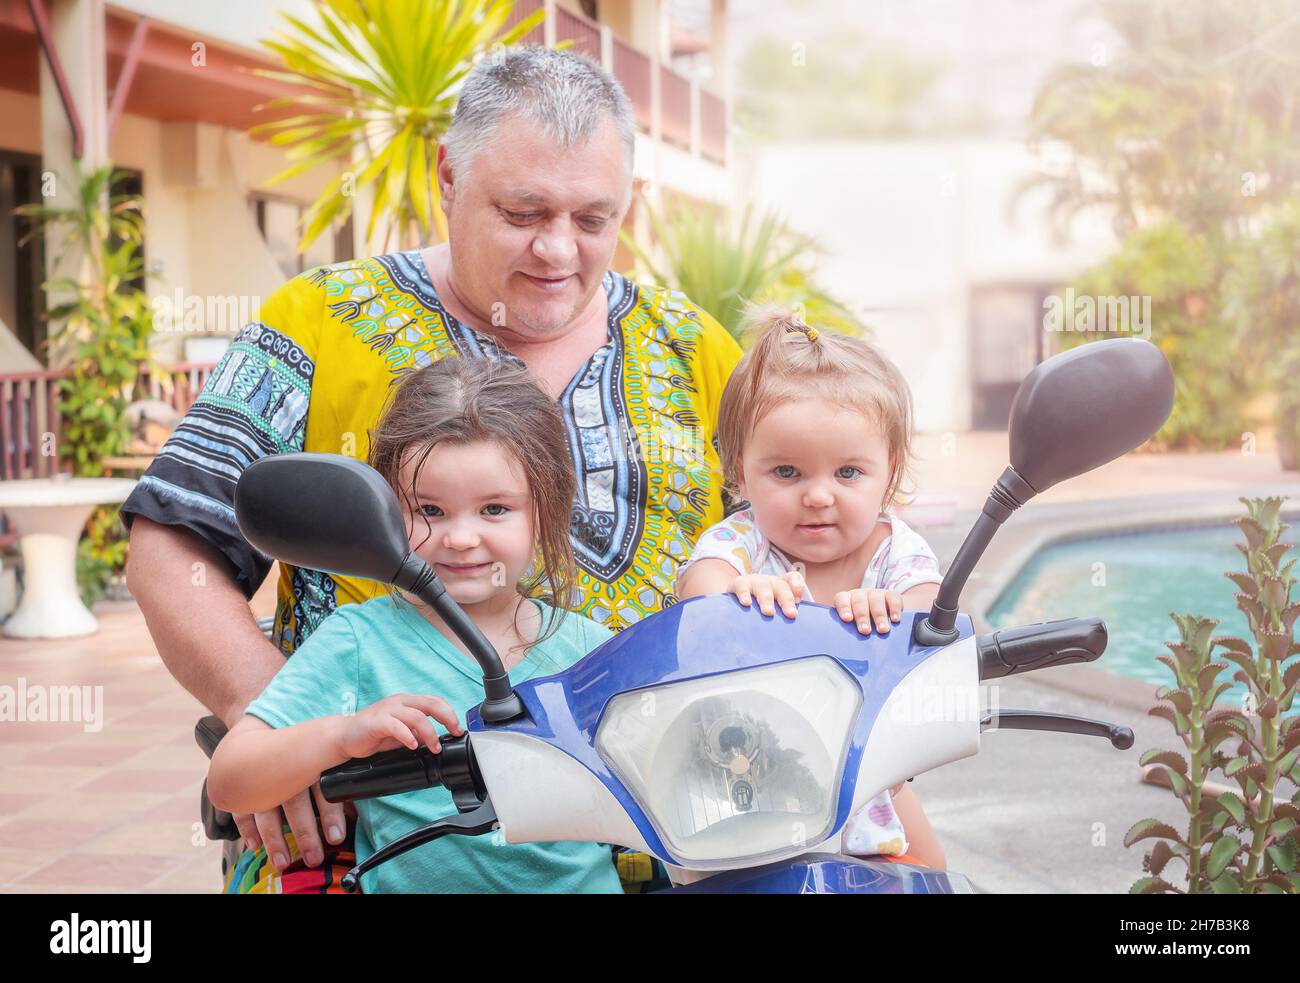 Grandfather with grandchildren on an electric motorbike portrait Stock Photo